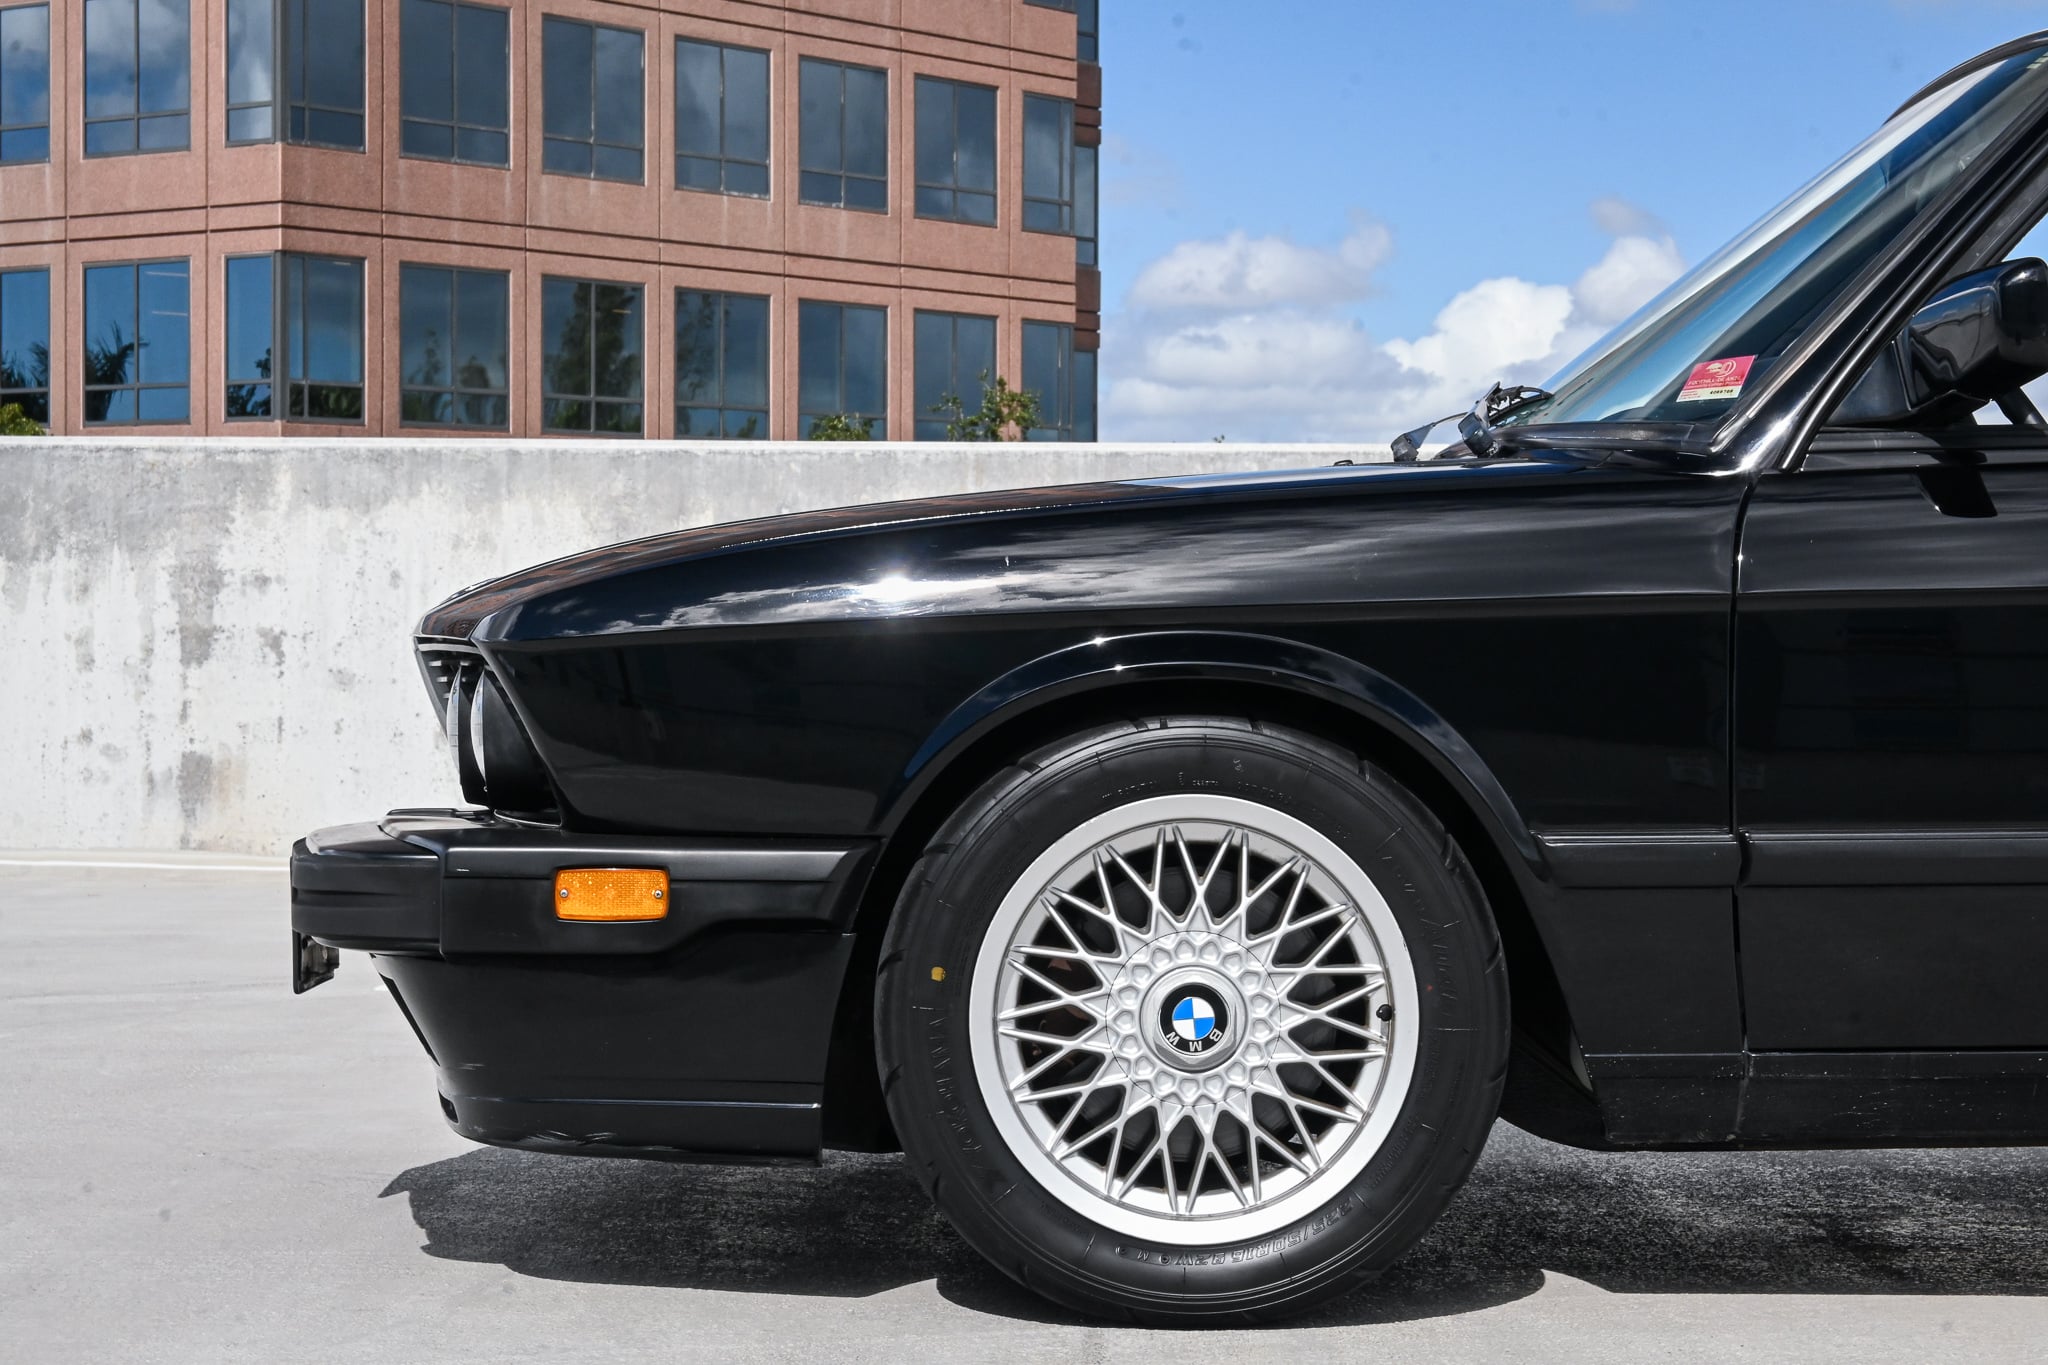 1988 E28 BMW M5 California Car | 2 Owner | 1 of 1239 | Original Bill of Sale | Hand Built Documented Service History | Recently Serviced